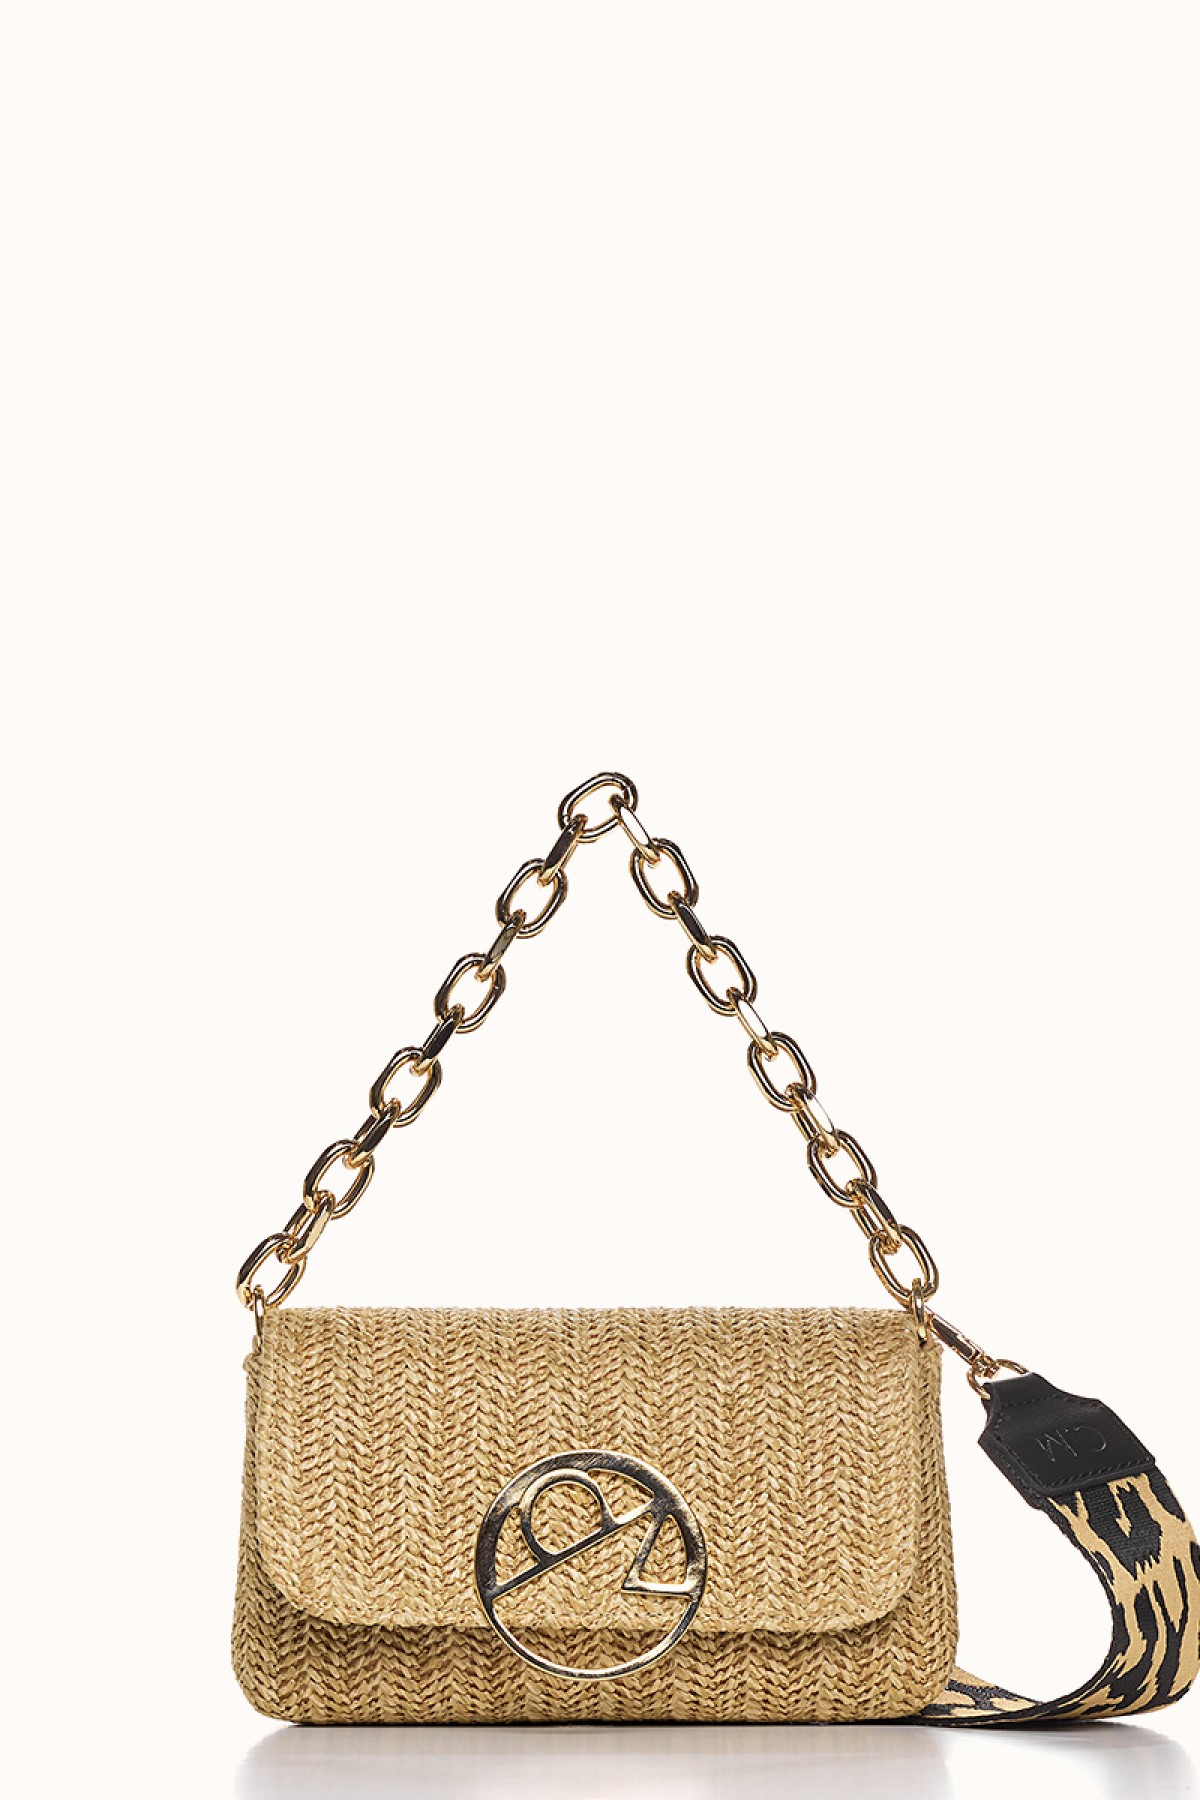 NATURAL STRAW ALL DAY ΜΙΝΙ BAG